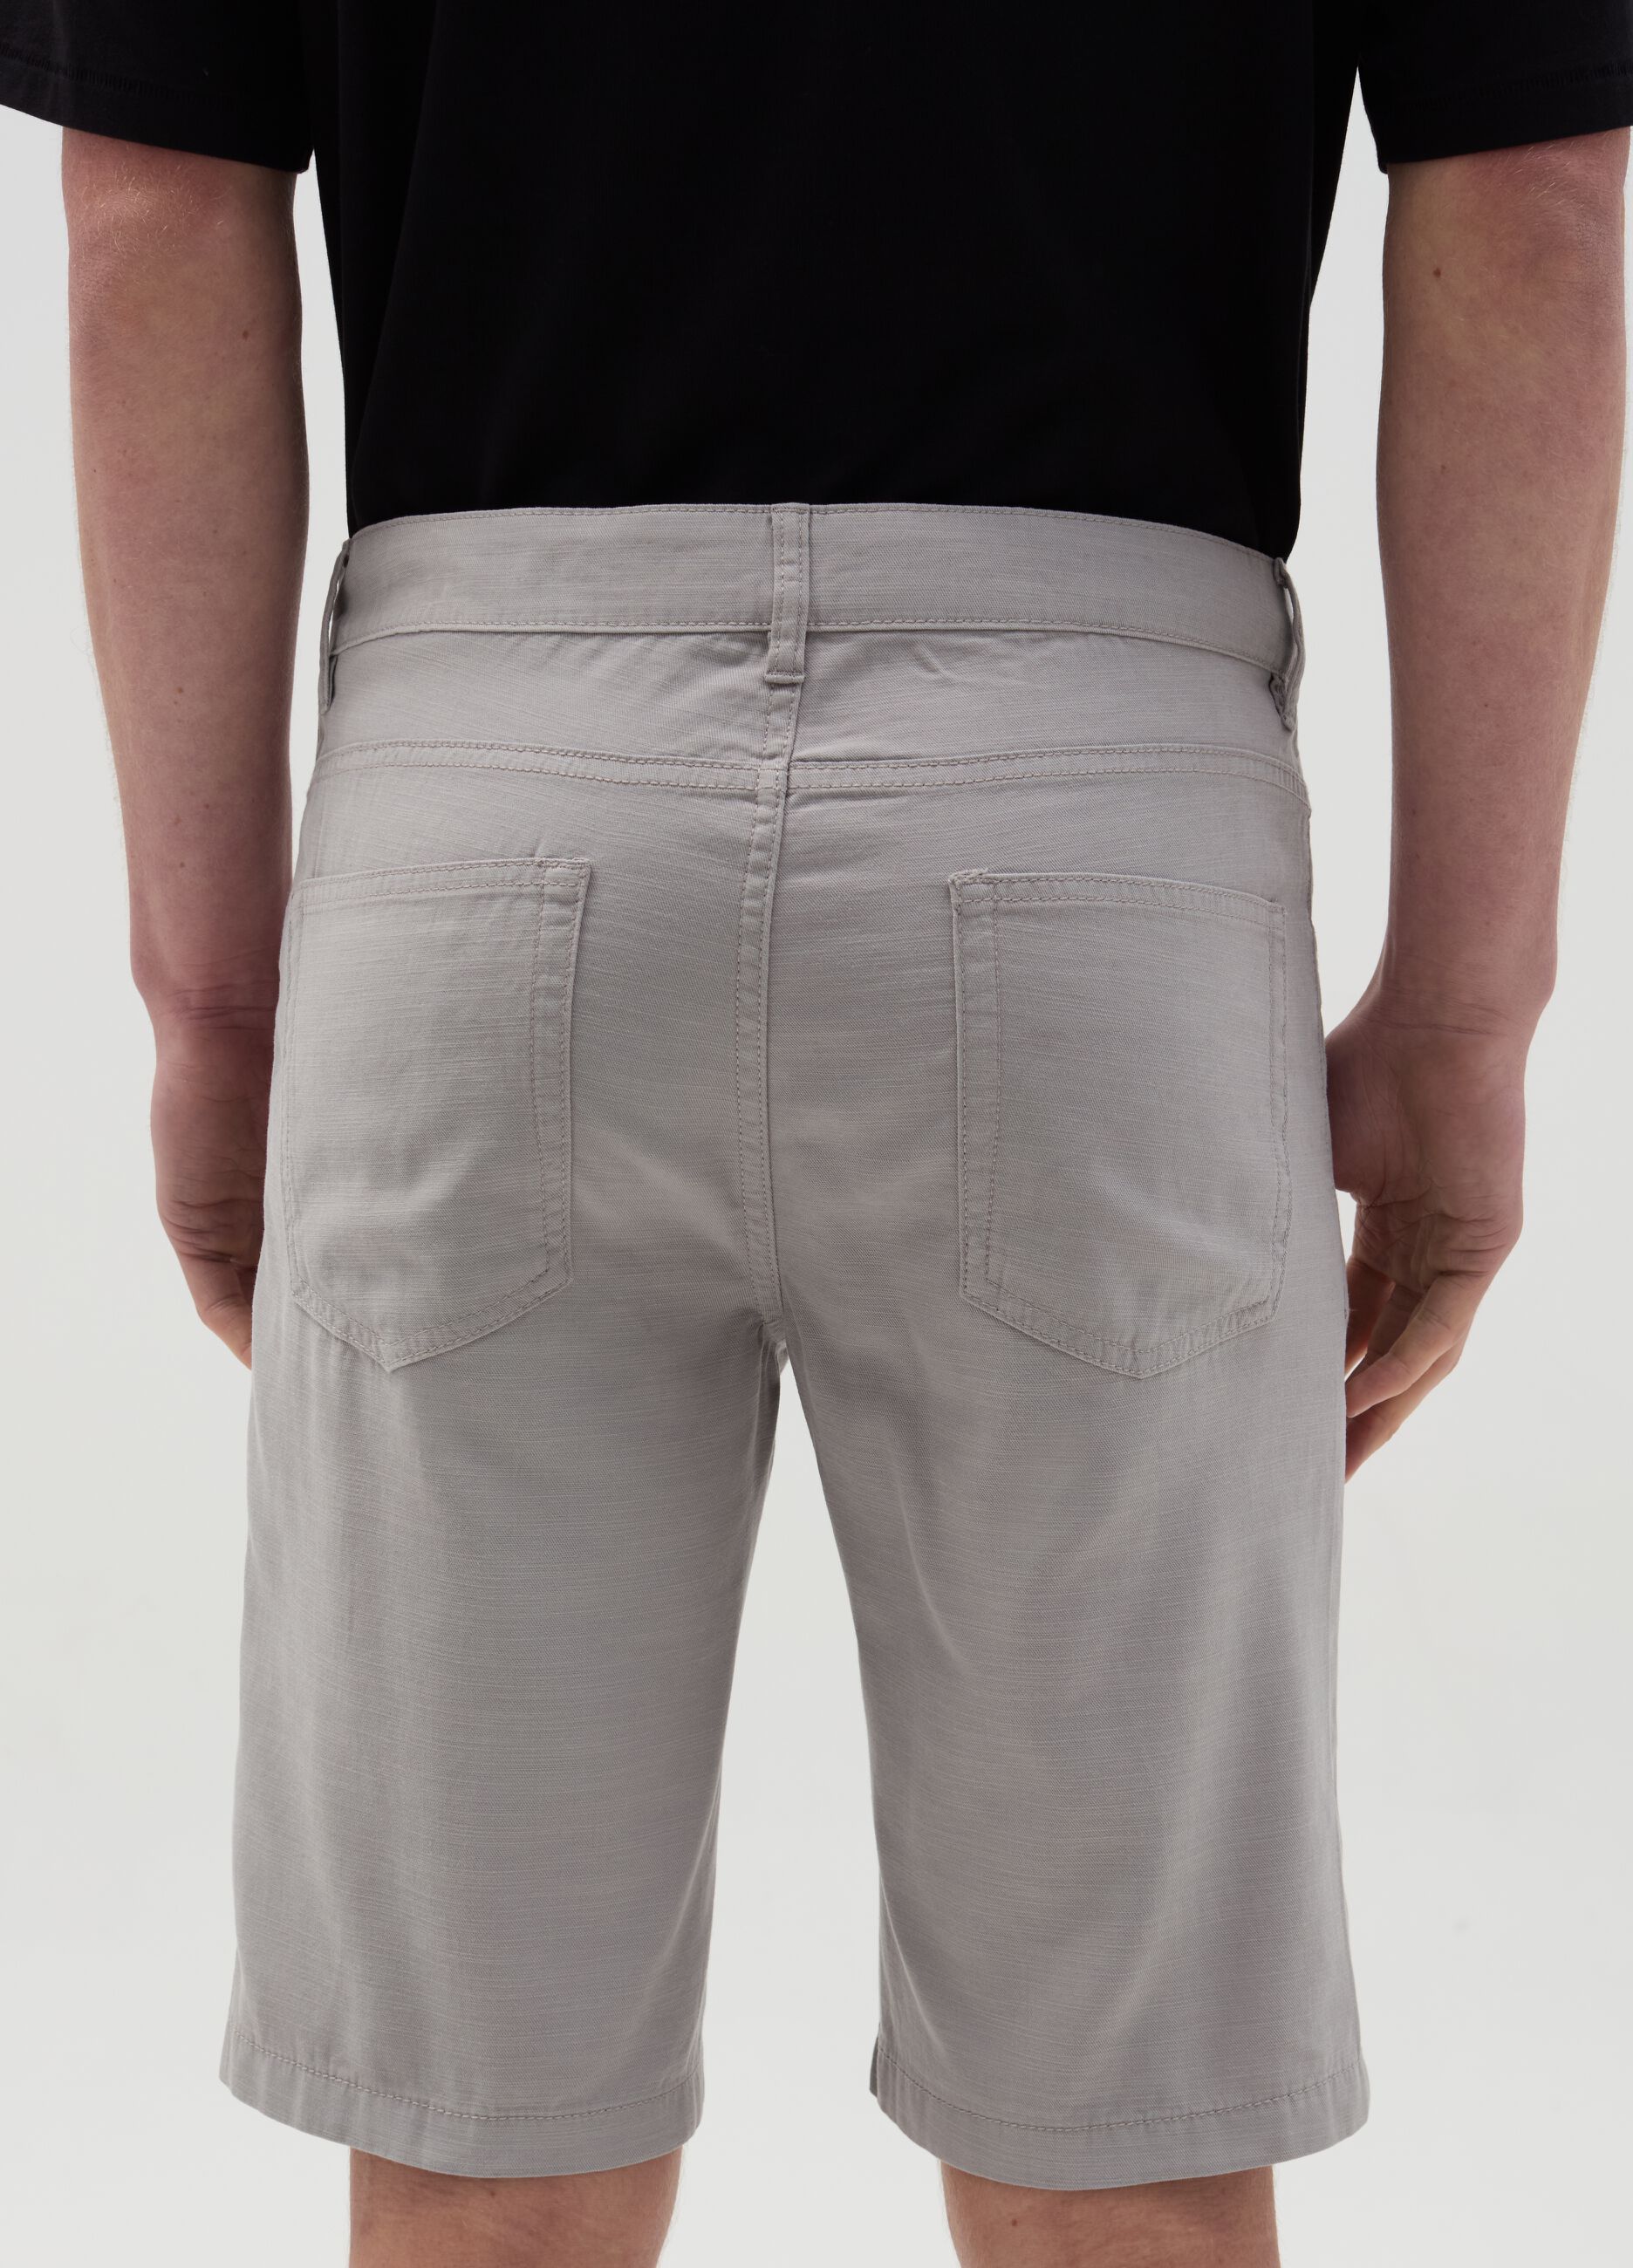 Bermuda shorts with five pockets in cotton and linen